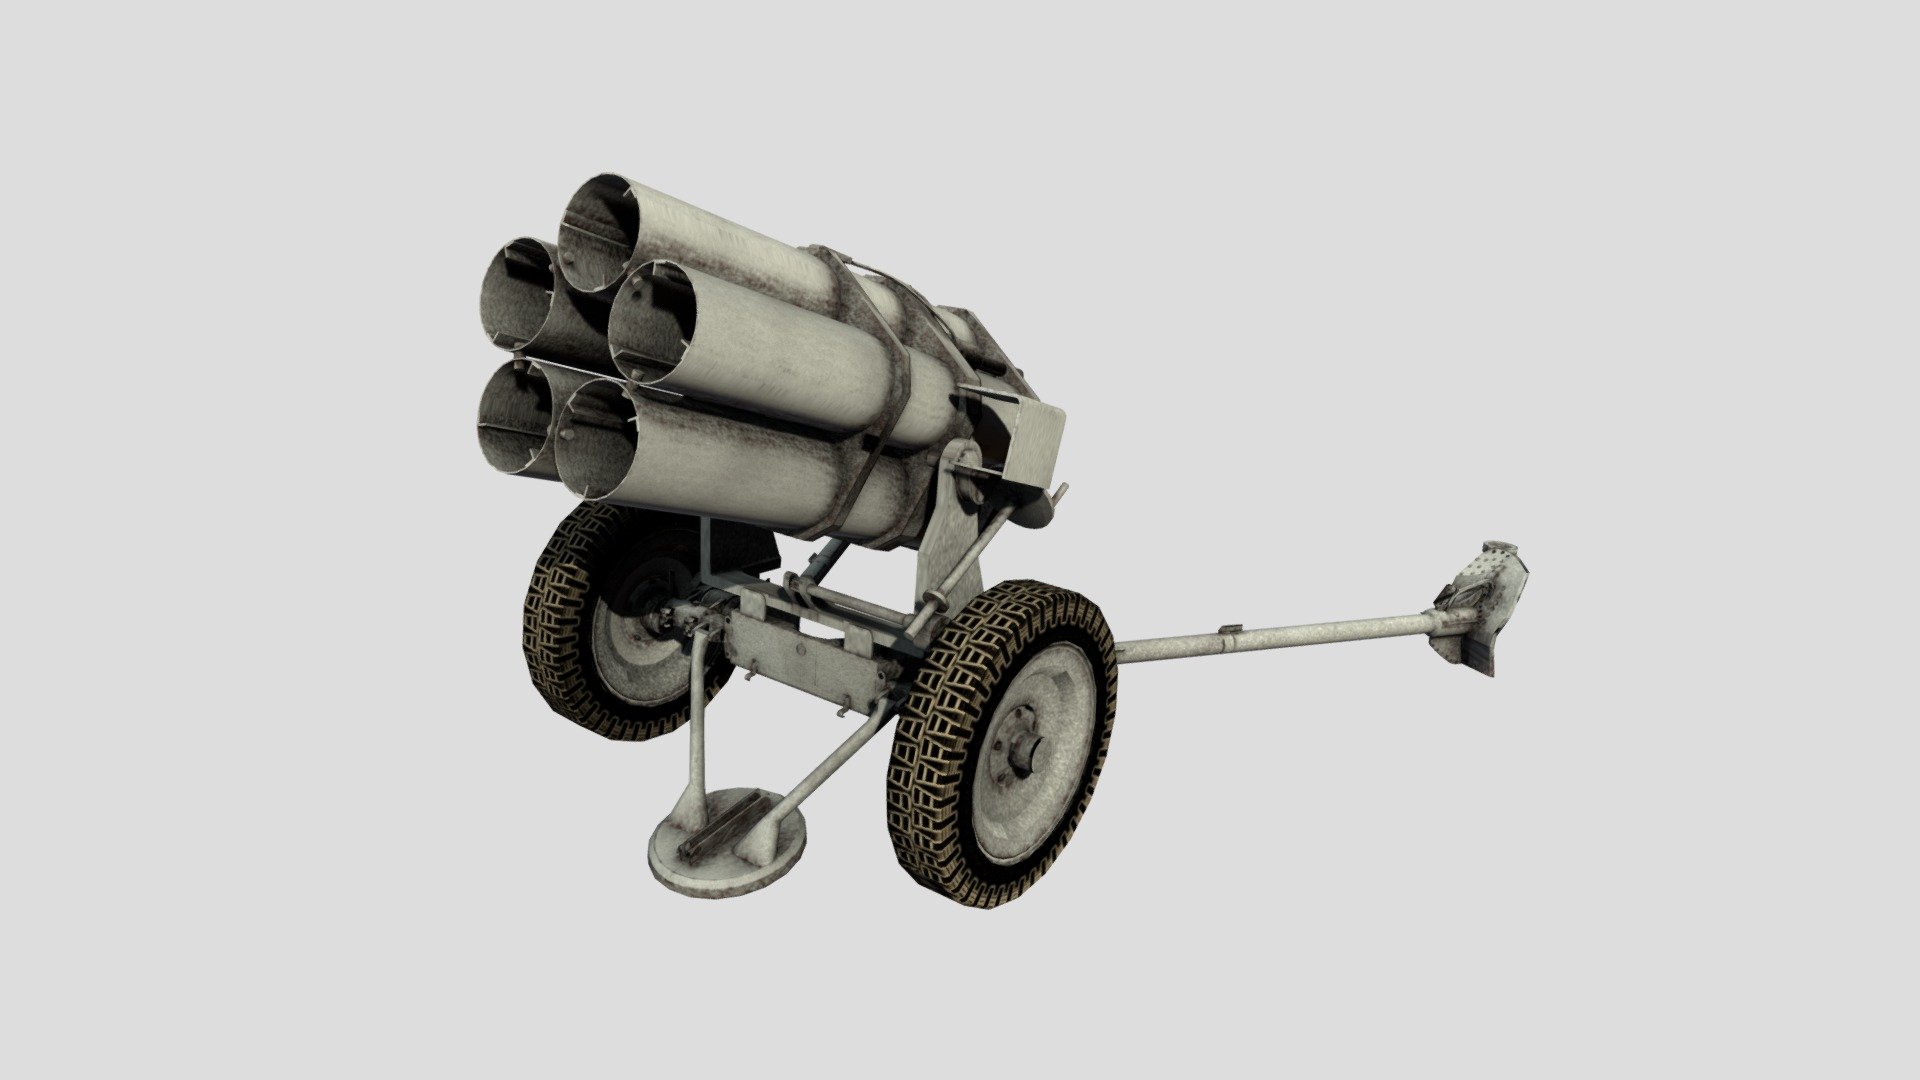 The Nebelwerfer 42 was a multiple rocket launcher used by the German Army in almost all theaters during the second half of World War II.

Modelled in Blender, baked and remeshed (6228 faces), contains 4K textures 3d model